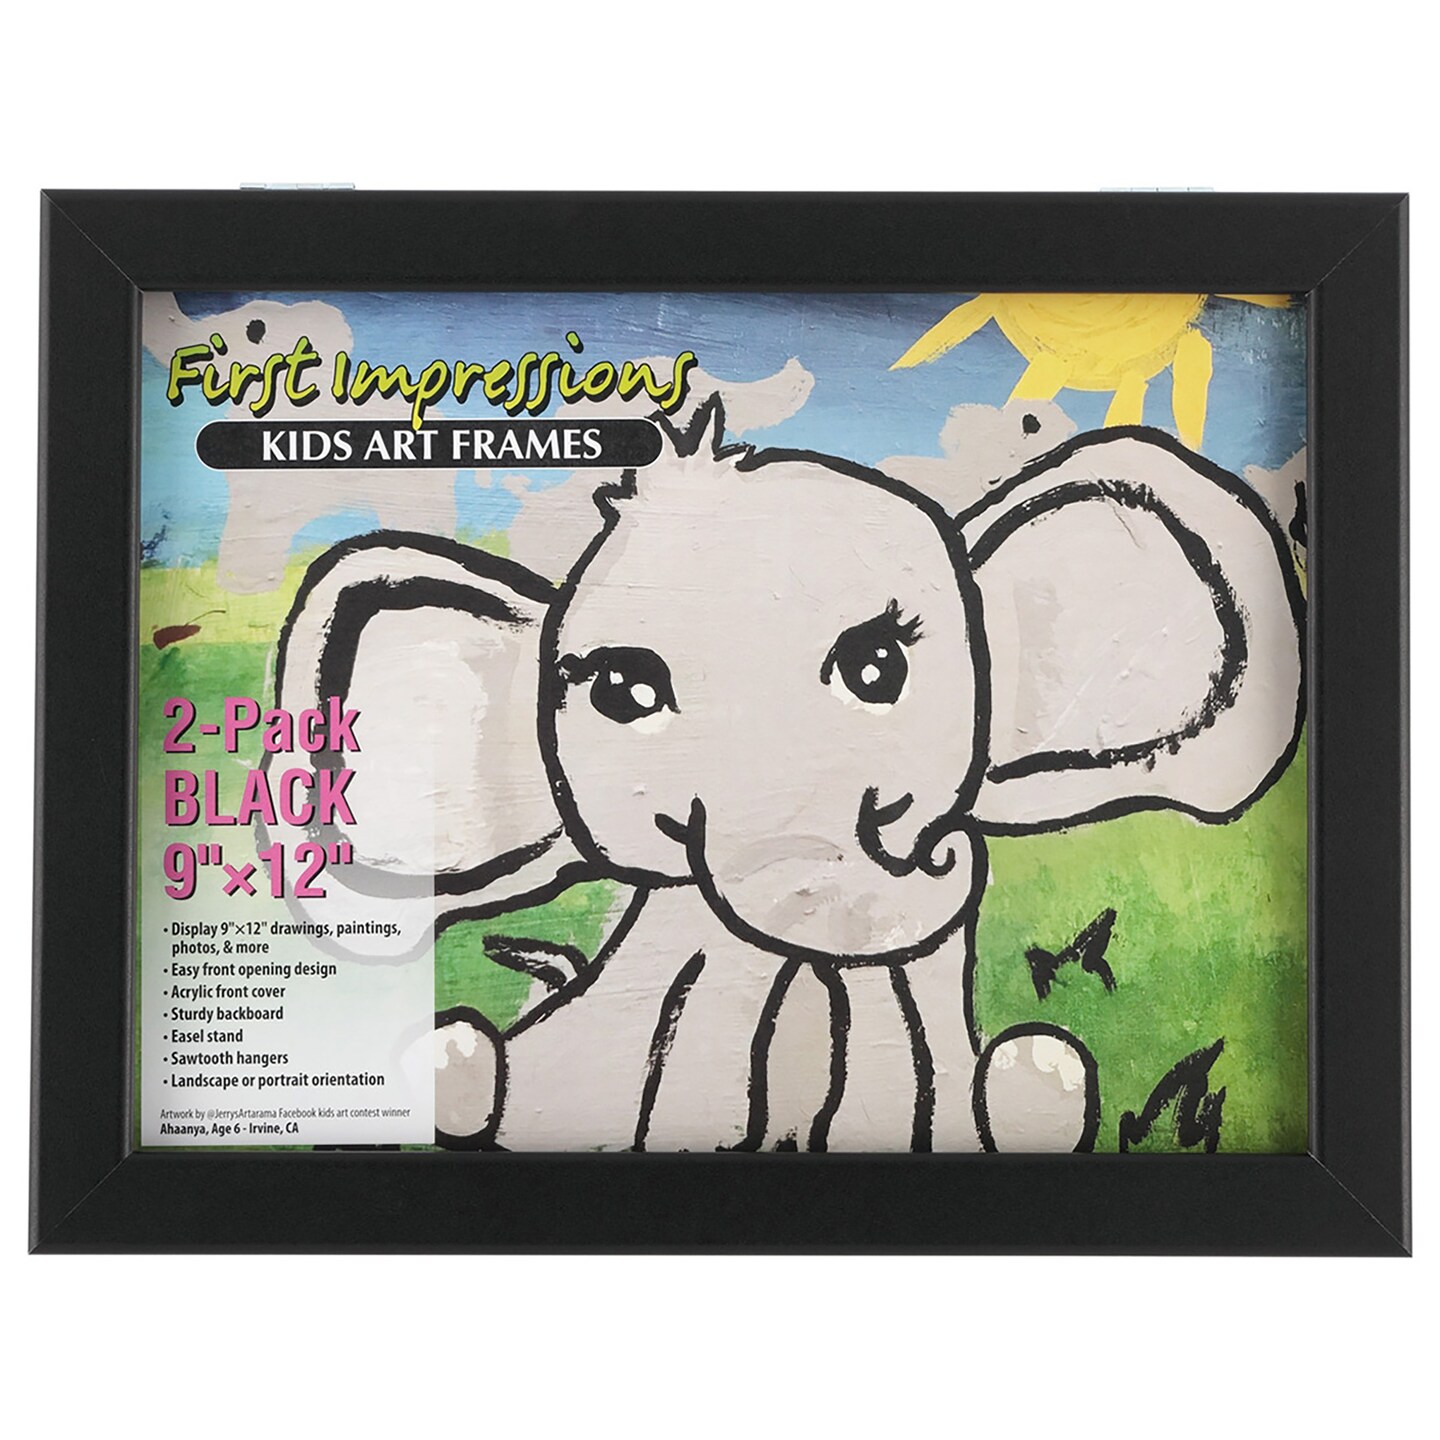 Maplefield Childrens Storage Frames for Artwork - Front Opening Art Display Frame - Great Gifts for Kids Who Love Art - Easy Change Artwork Picture